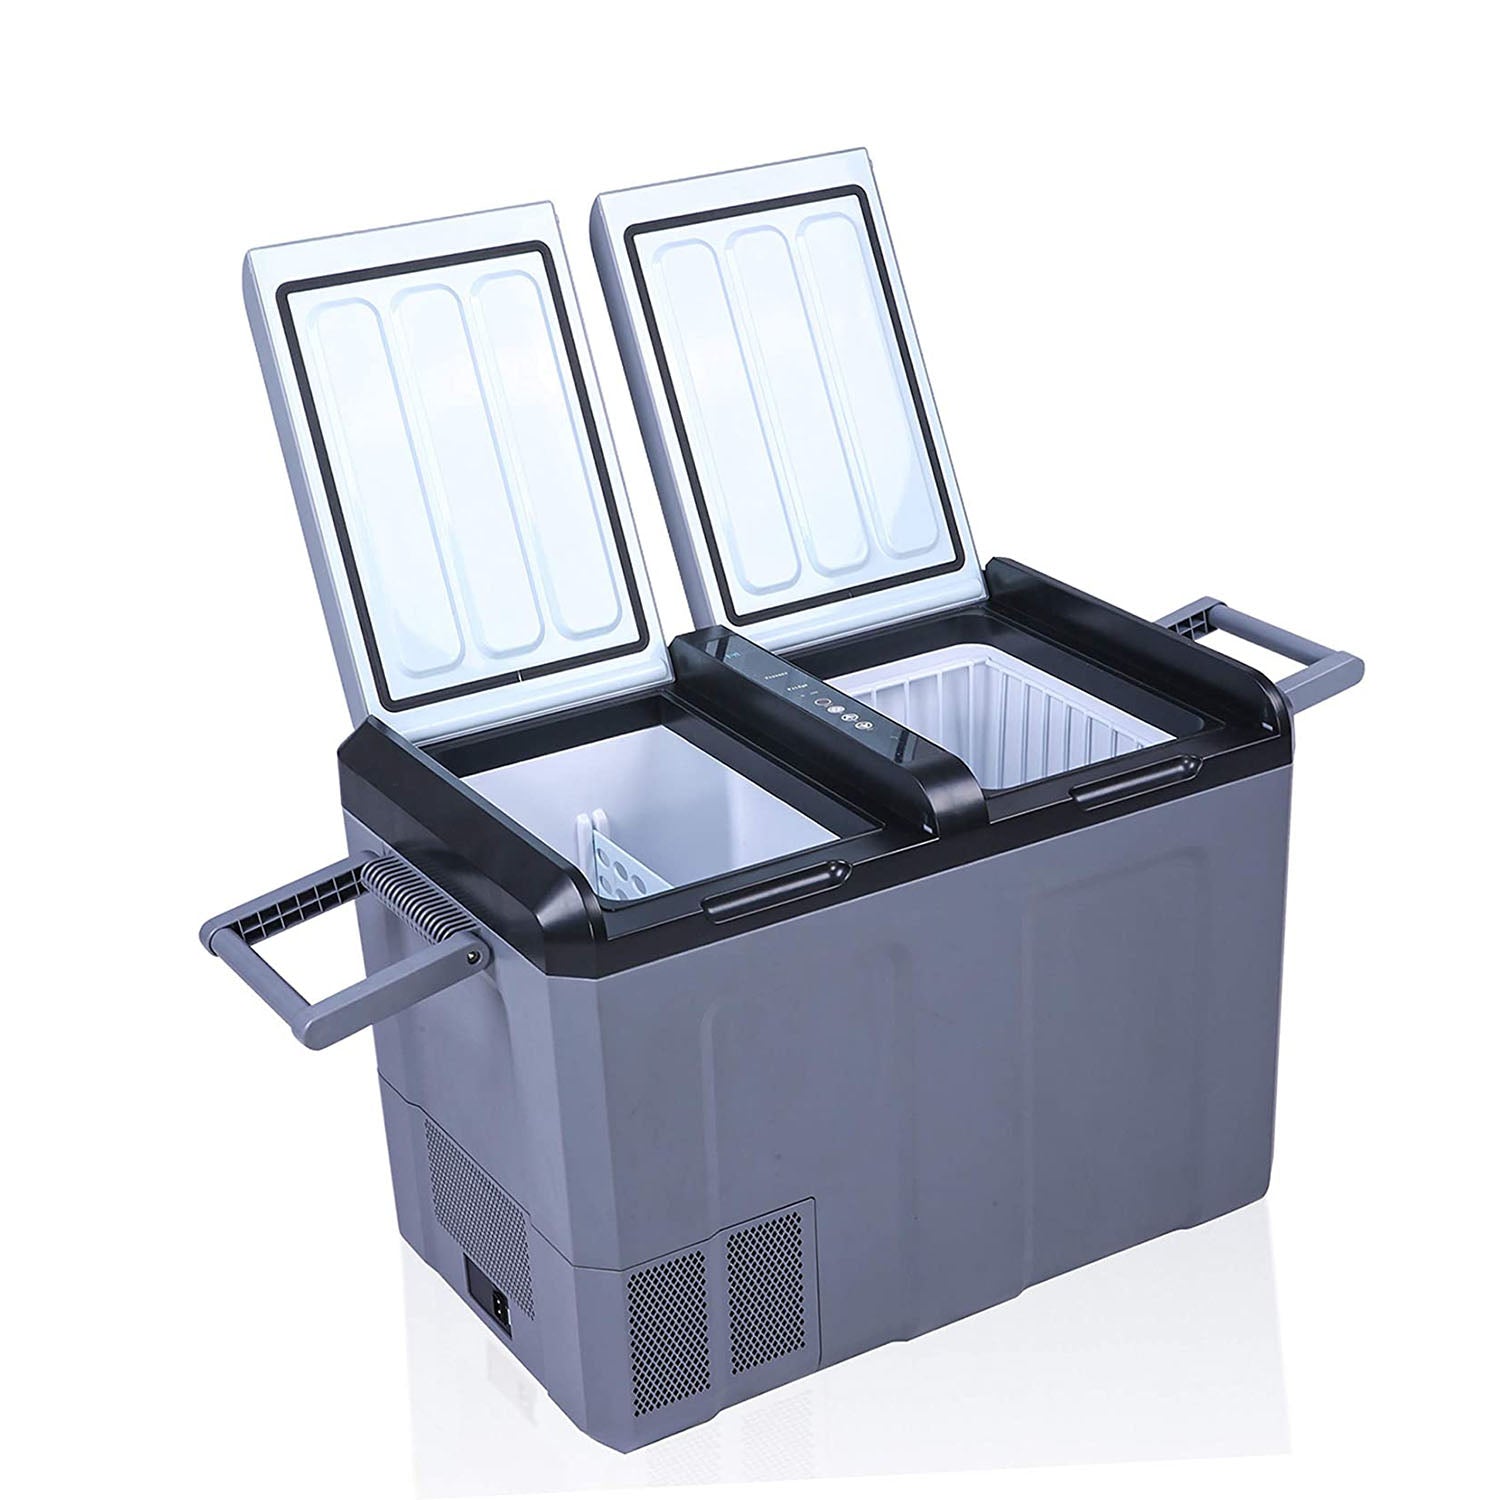 2 IN 1 Portable Car Refrigerator Freezer Shockproof Cooler 55-Quart, with LCD Display Double Doors